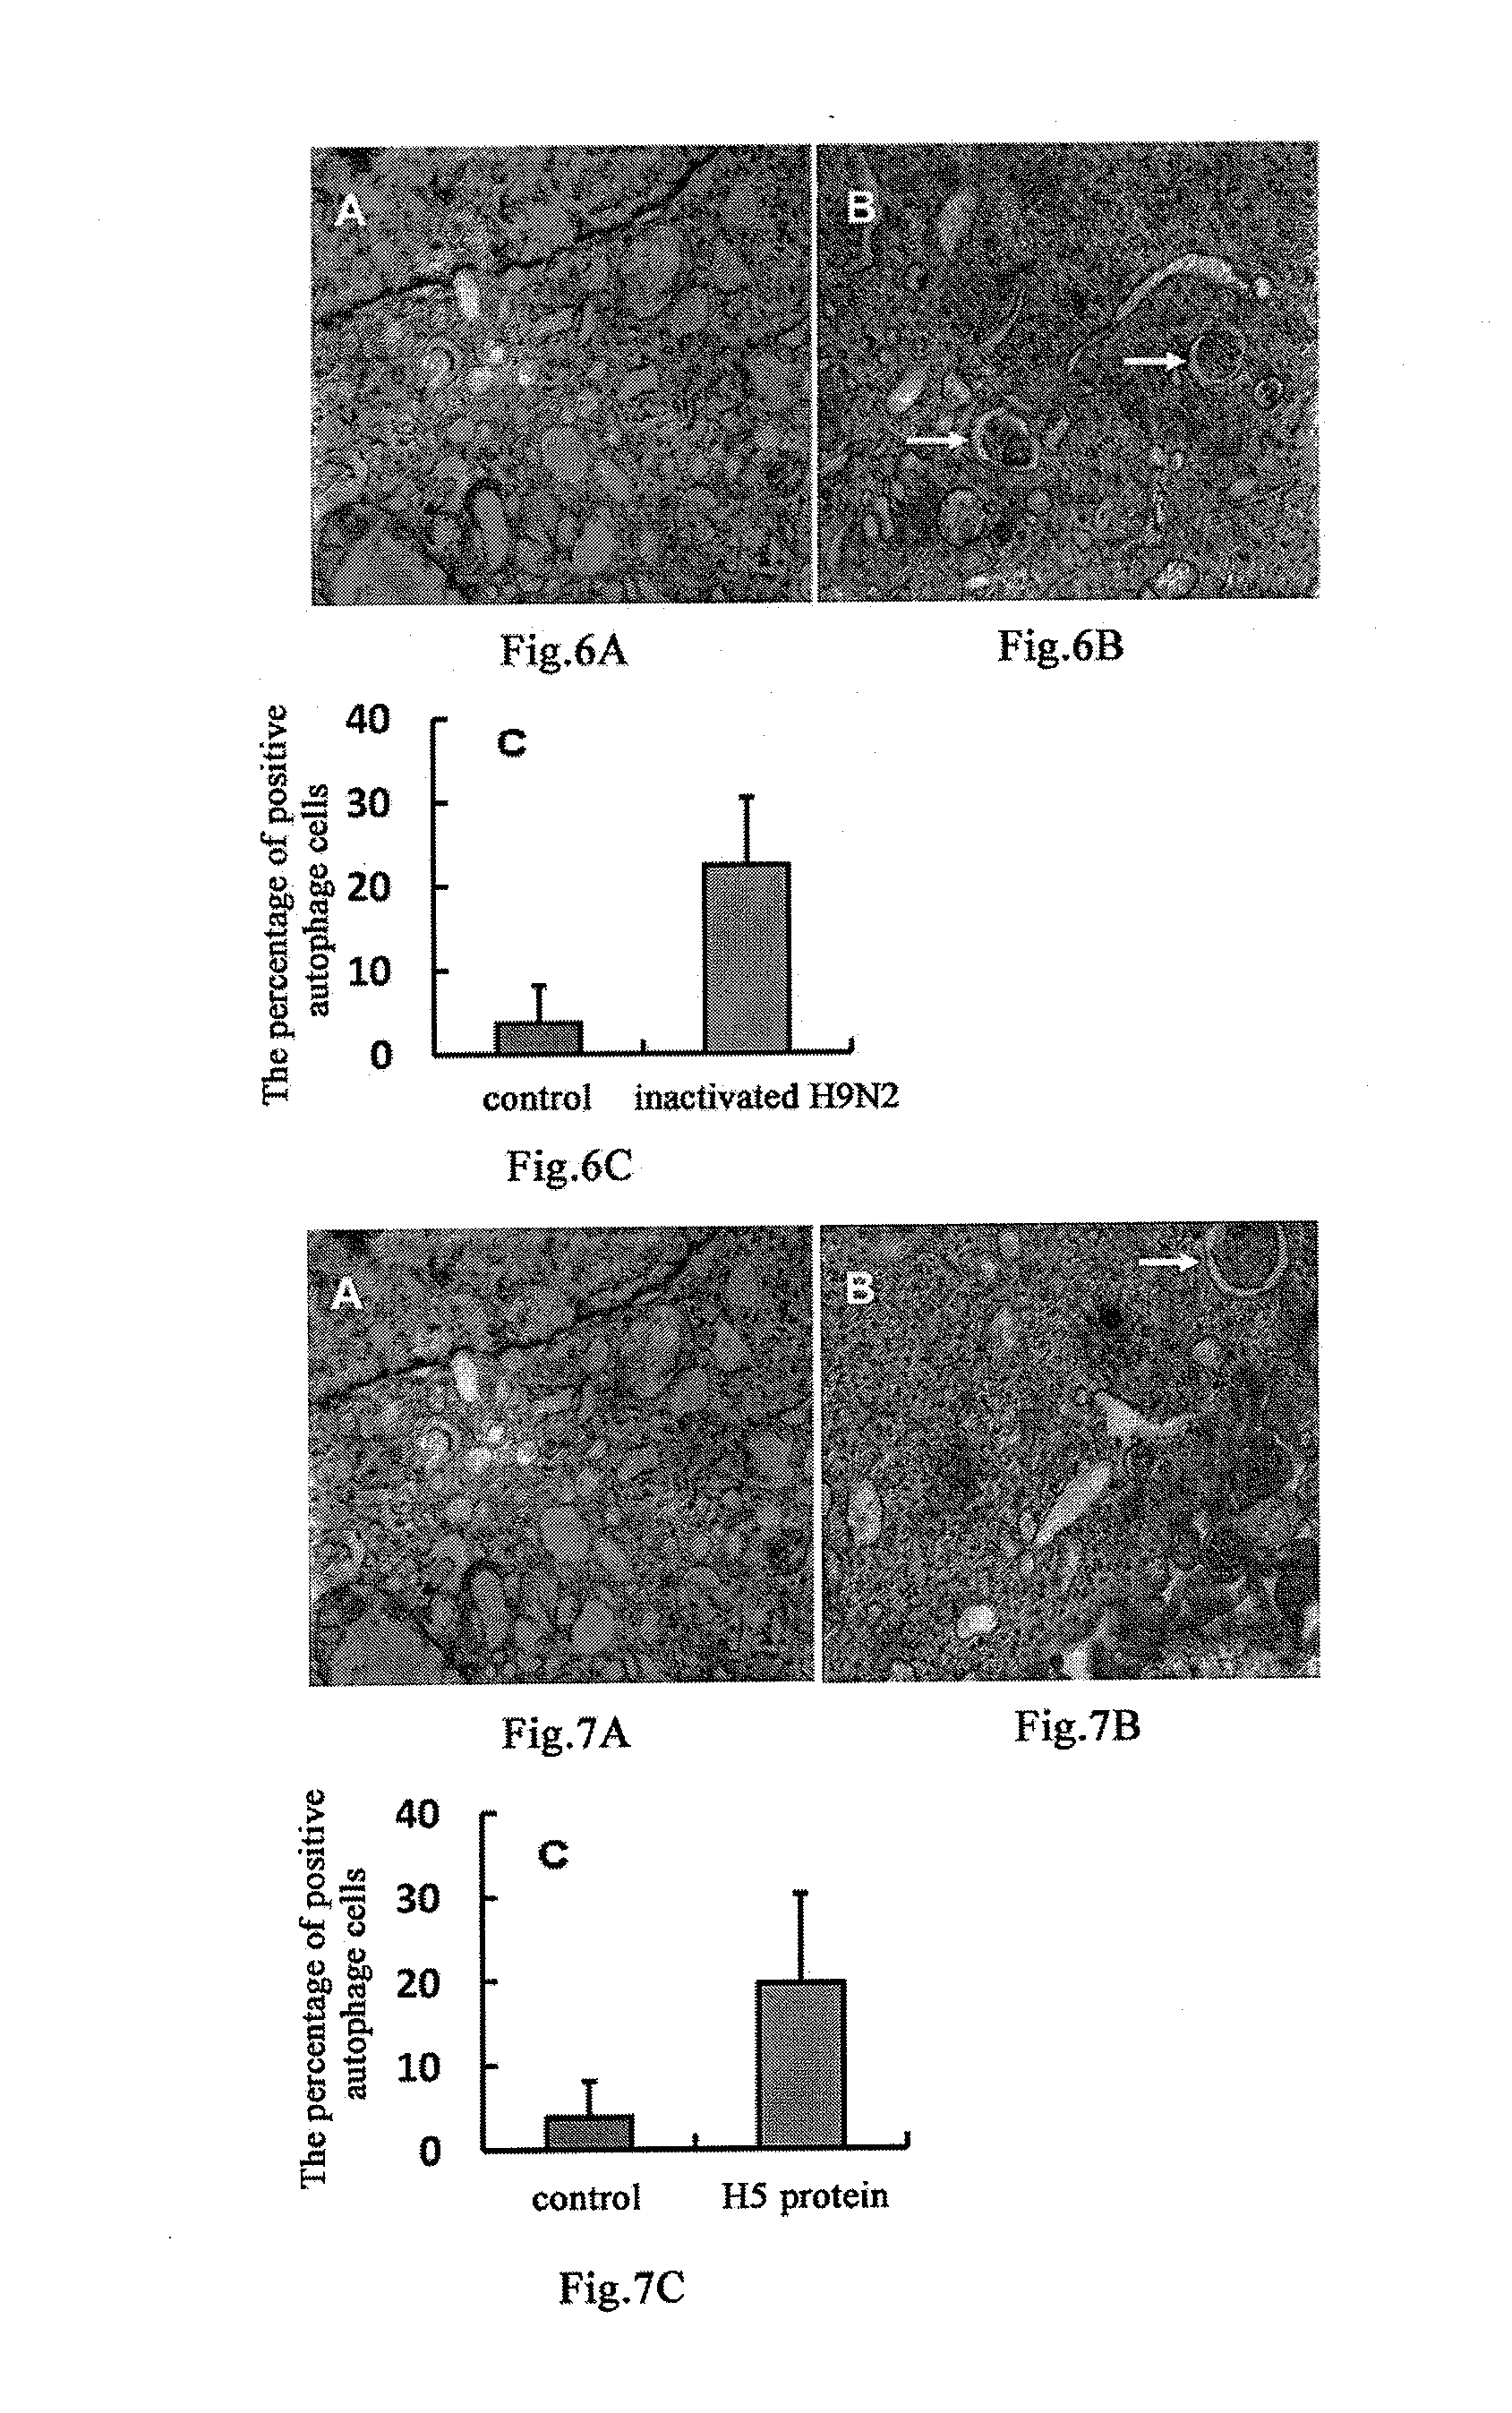 Use of cell autophagy (type ii cell apoptosis) inhibitors